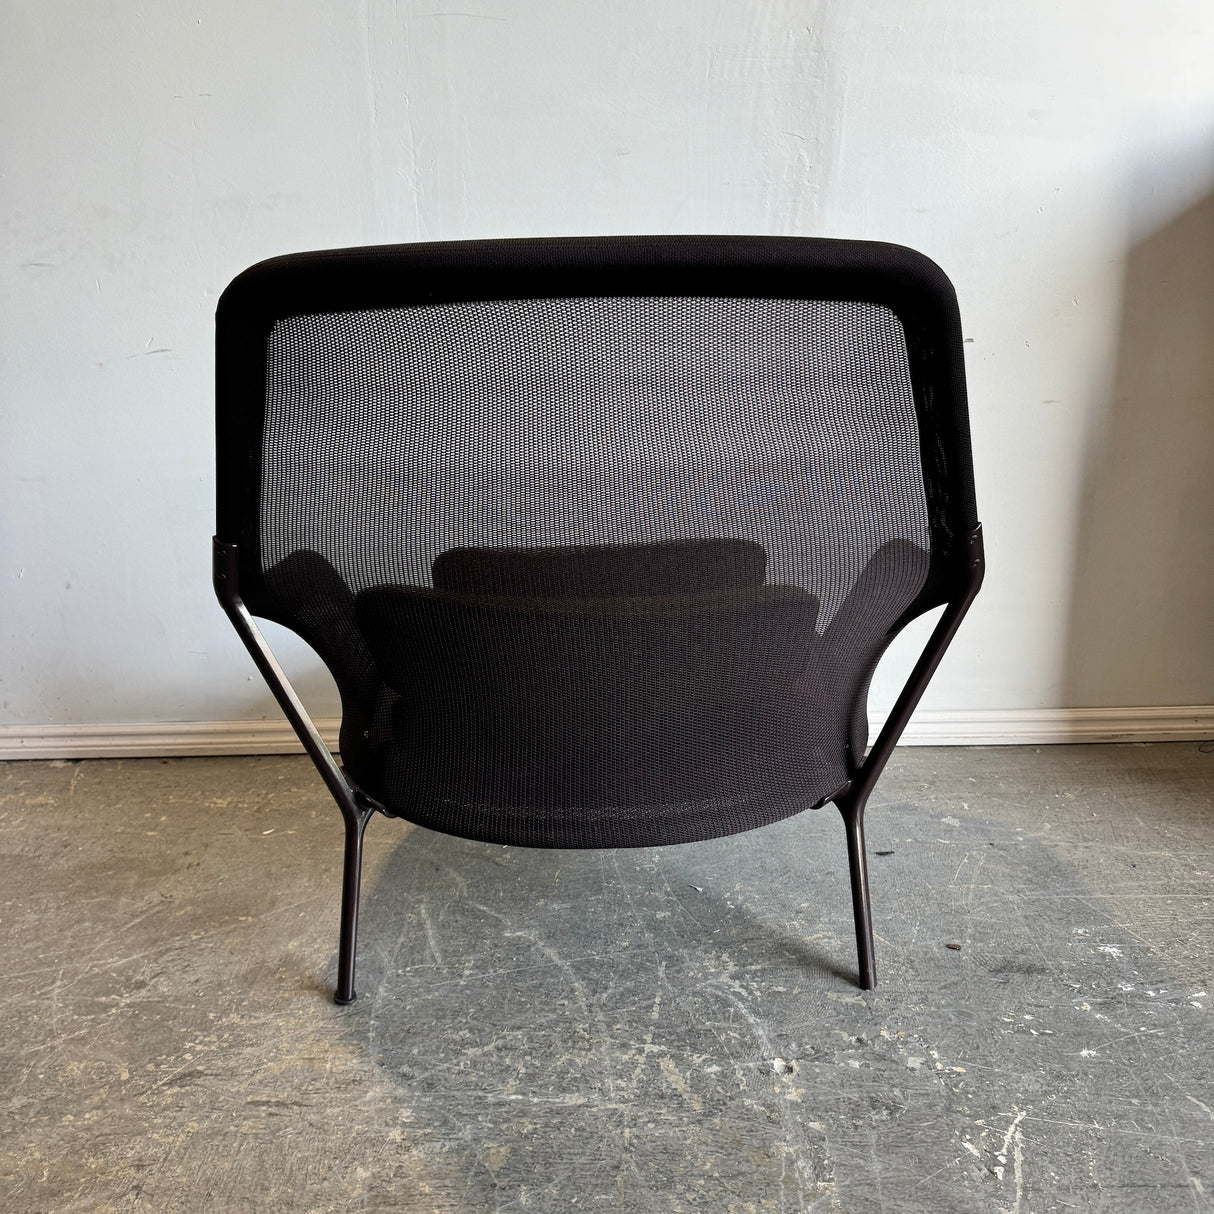 Authentic! Vitra Slow Chair by Ronan and Erwan Bouroullec for Vitra